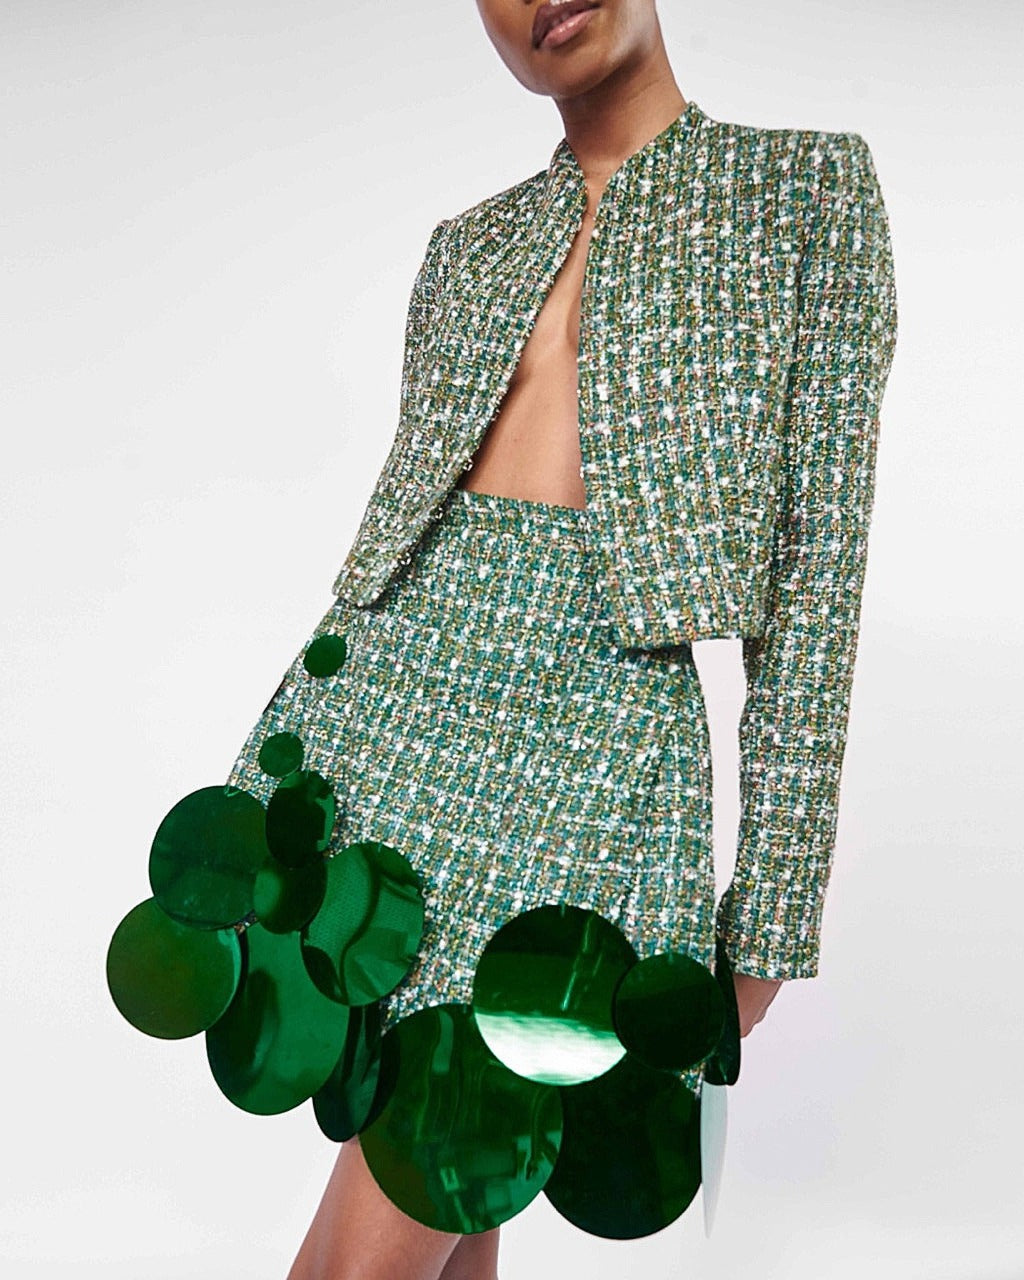 A model wearing a Green long sleeve crop jacket and Green high waist mini skirt with sequins embellishment